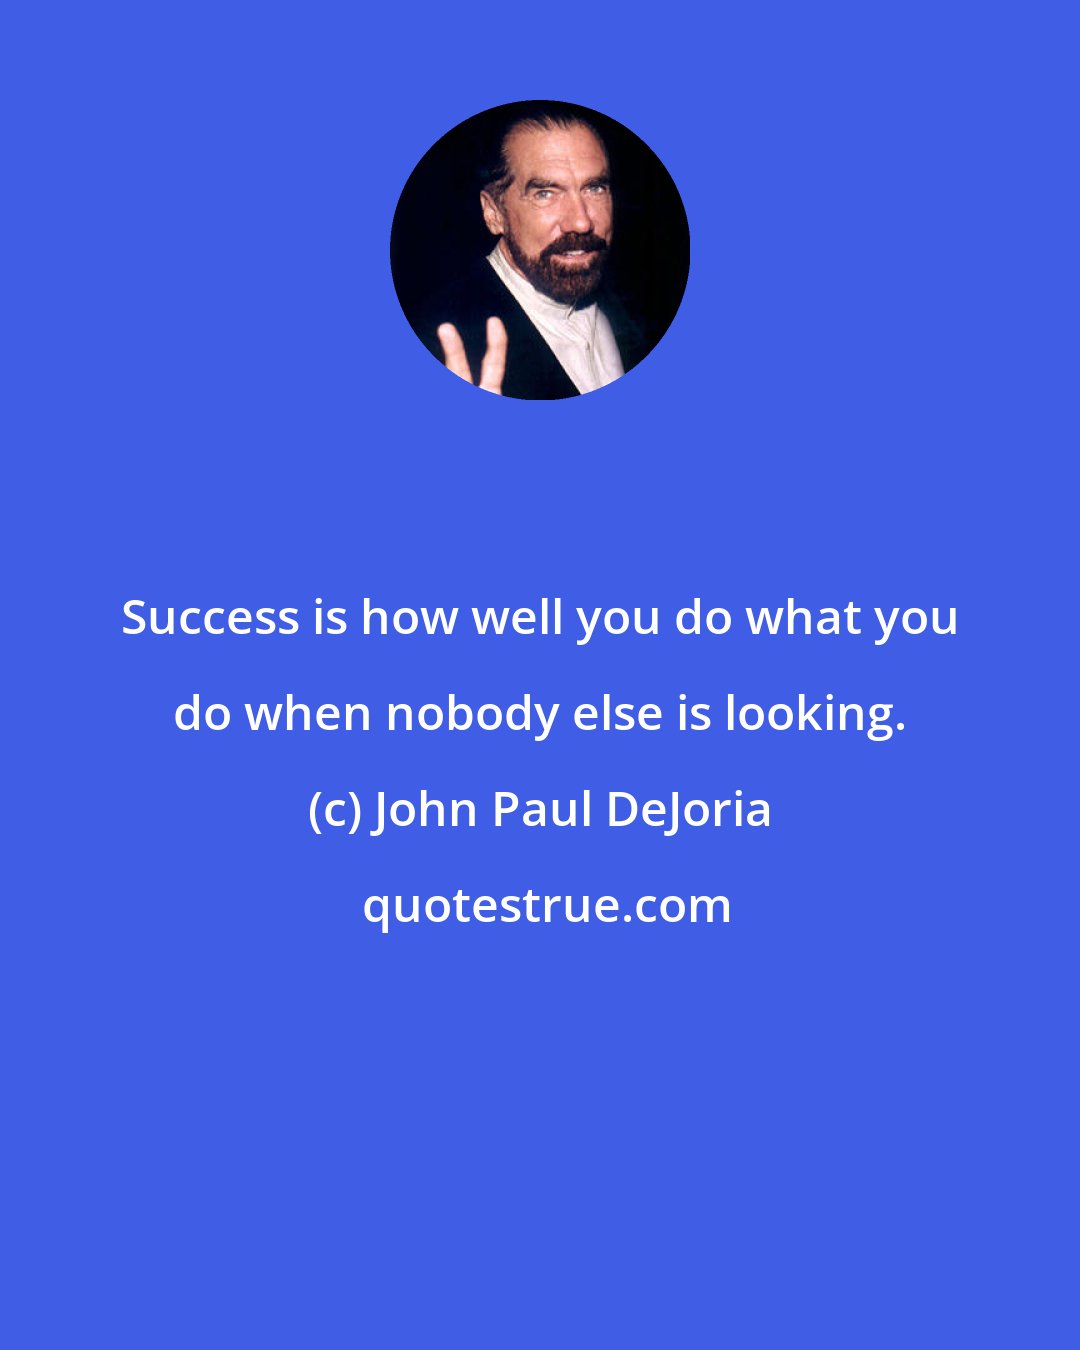 John Paul DeJoria: Success is how well you do what you do when nobody else is looking.